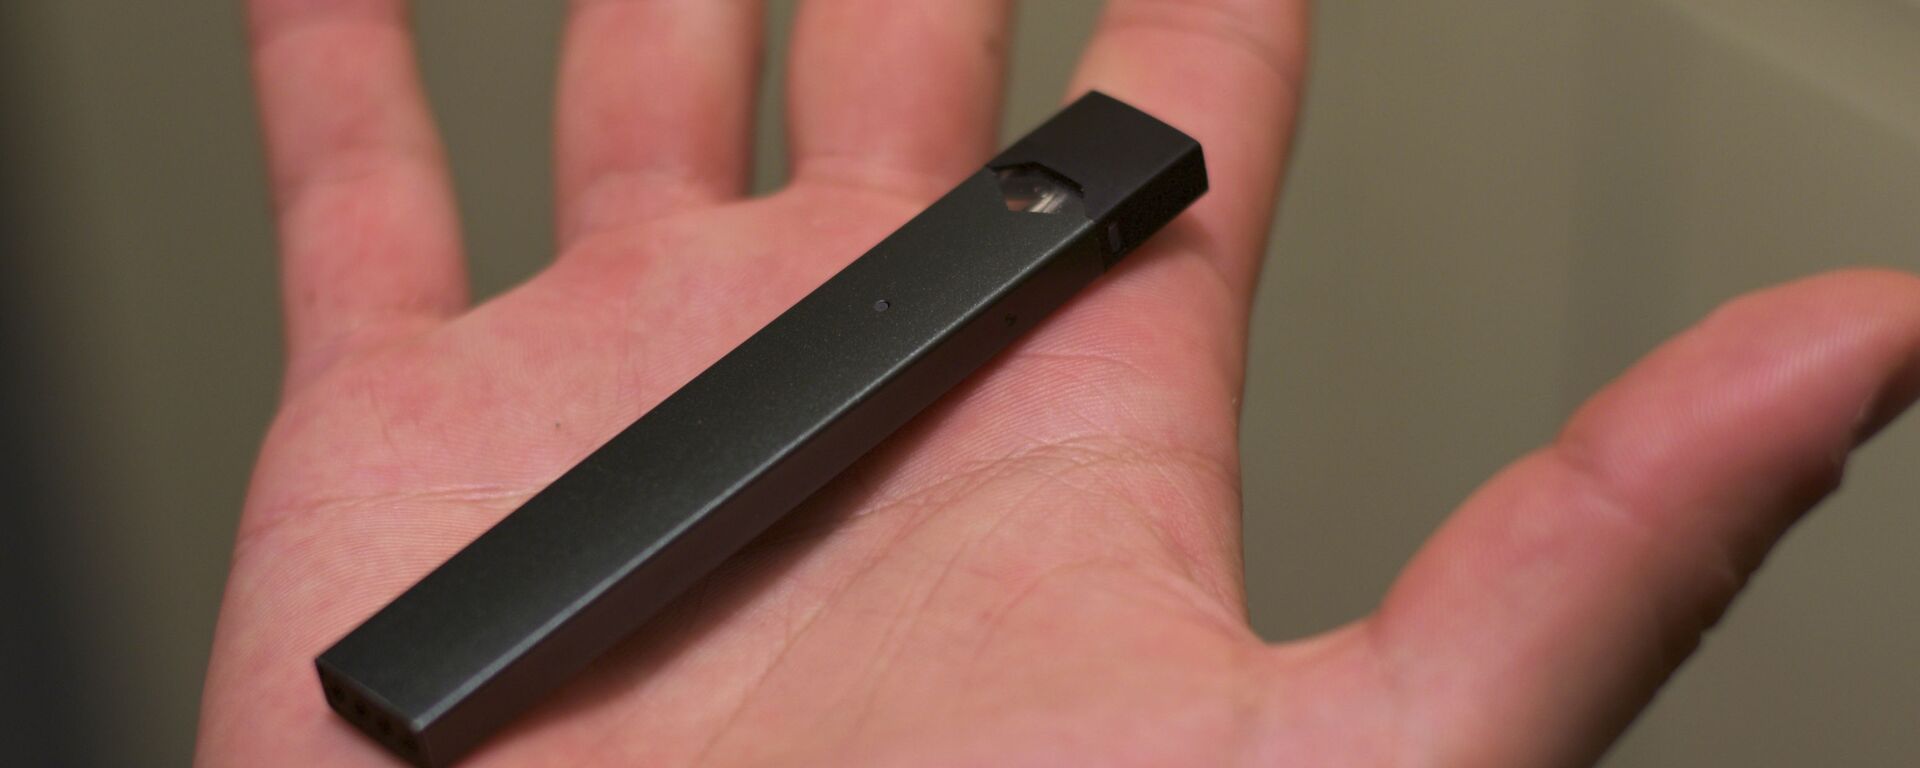 An electronic cigarette manufactured by Juul Labs, Inc.  - Sputnik International, 1920, 25.06.2022